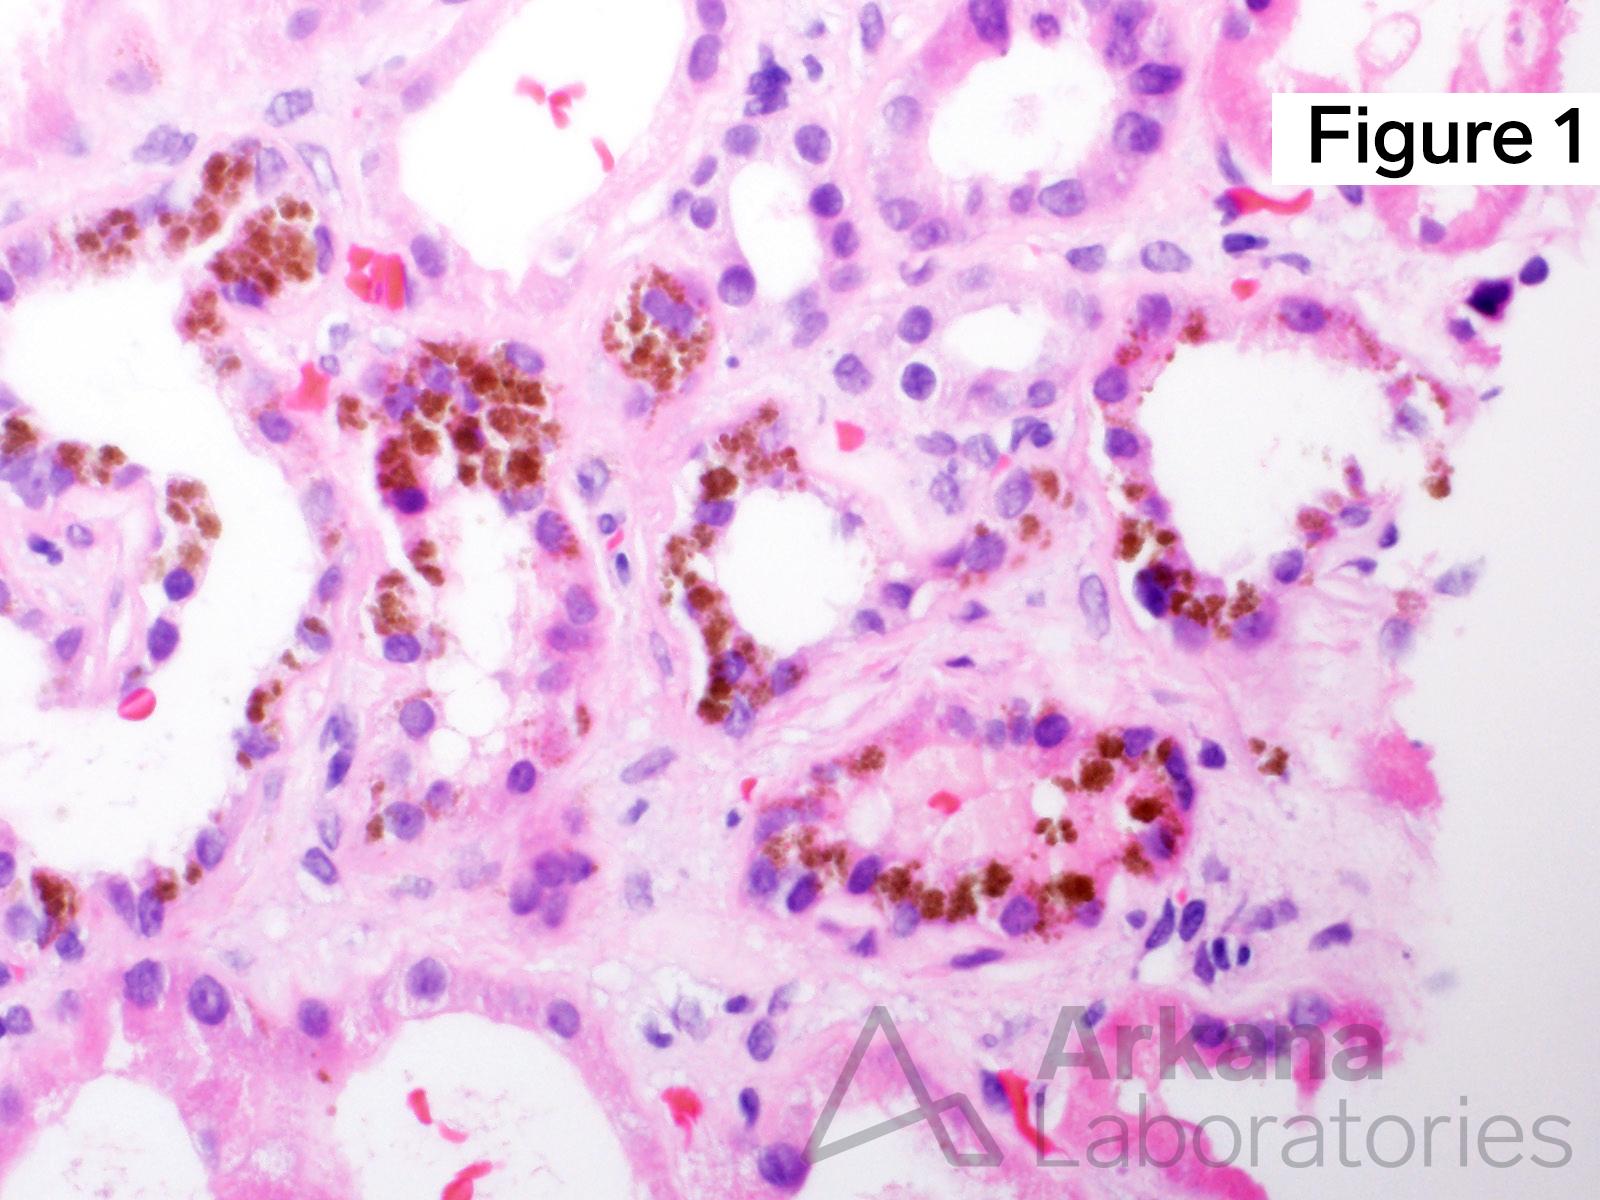 sickled cell within a glomerular capillary